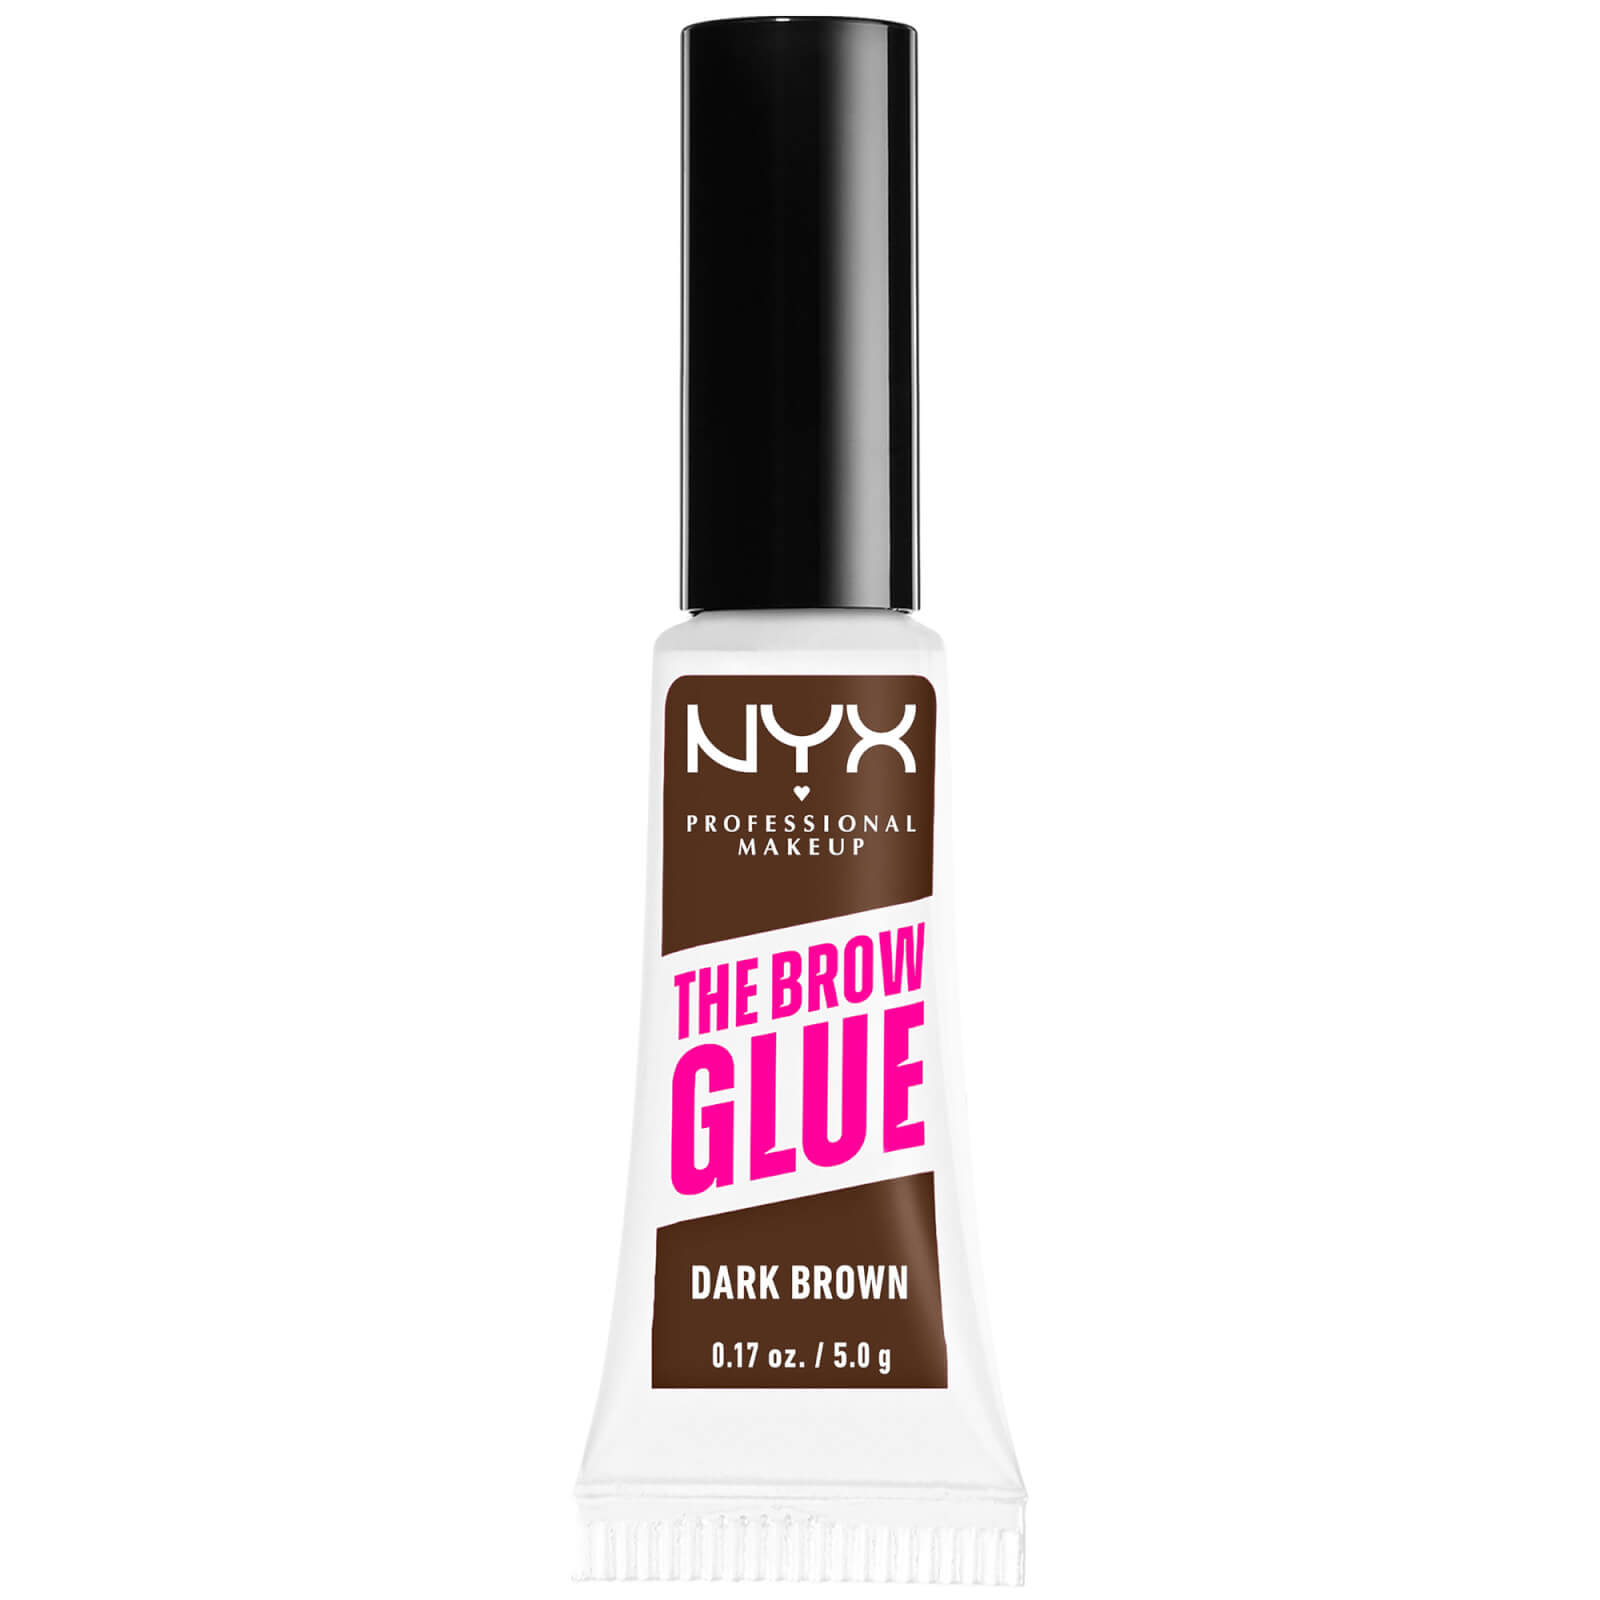 NYX Professional Makeup The Brow Glue Instant Styler 5g (Various Shades) - Dark Brown von NYX Professional Makeup